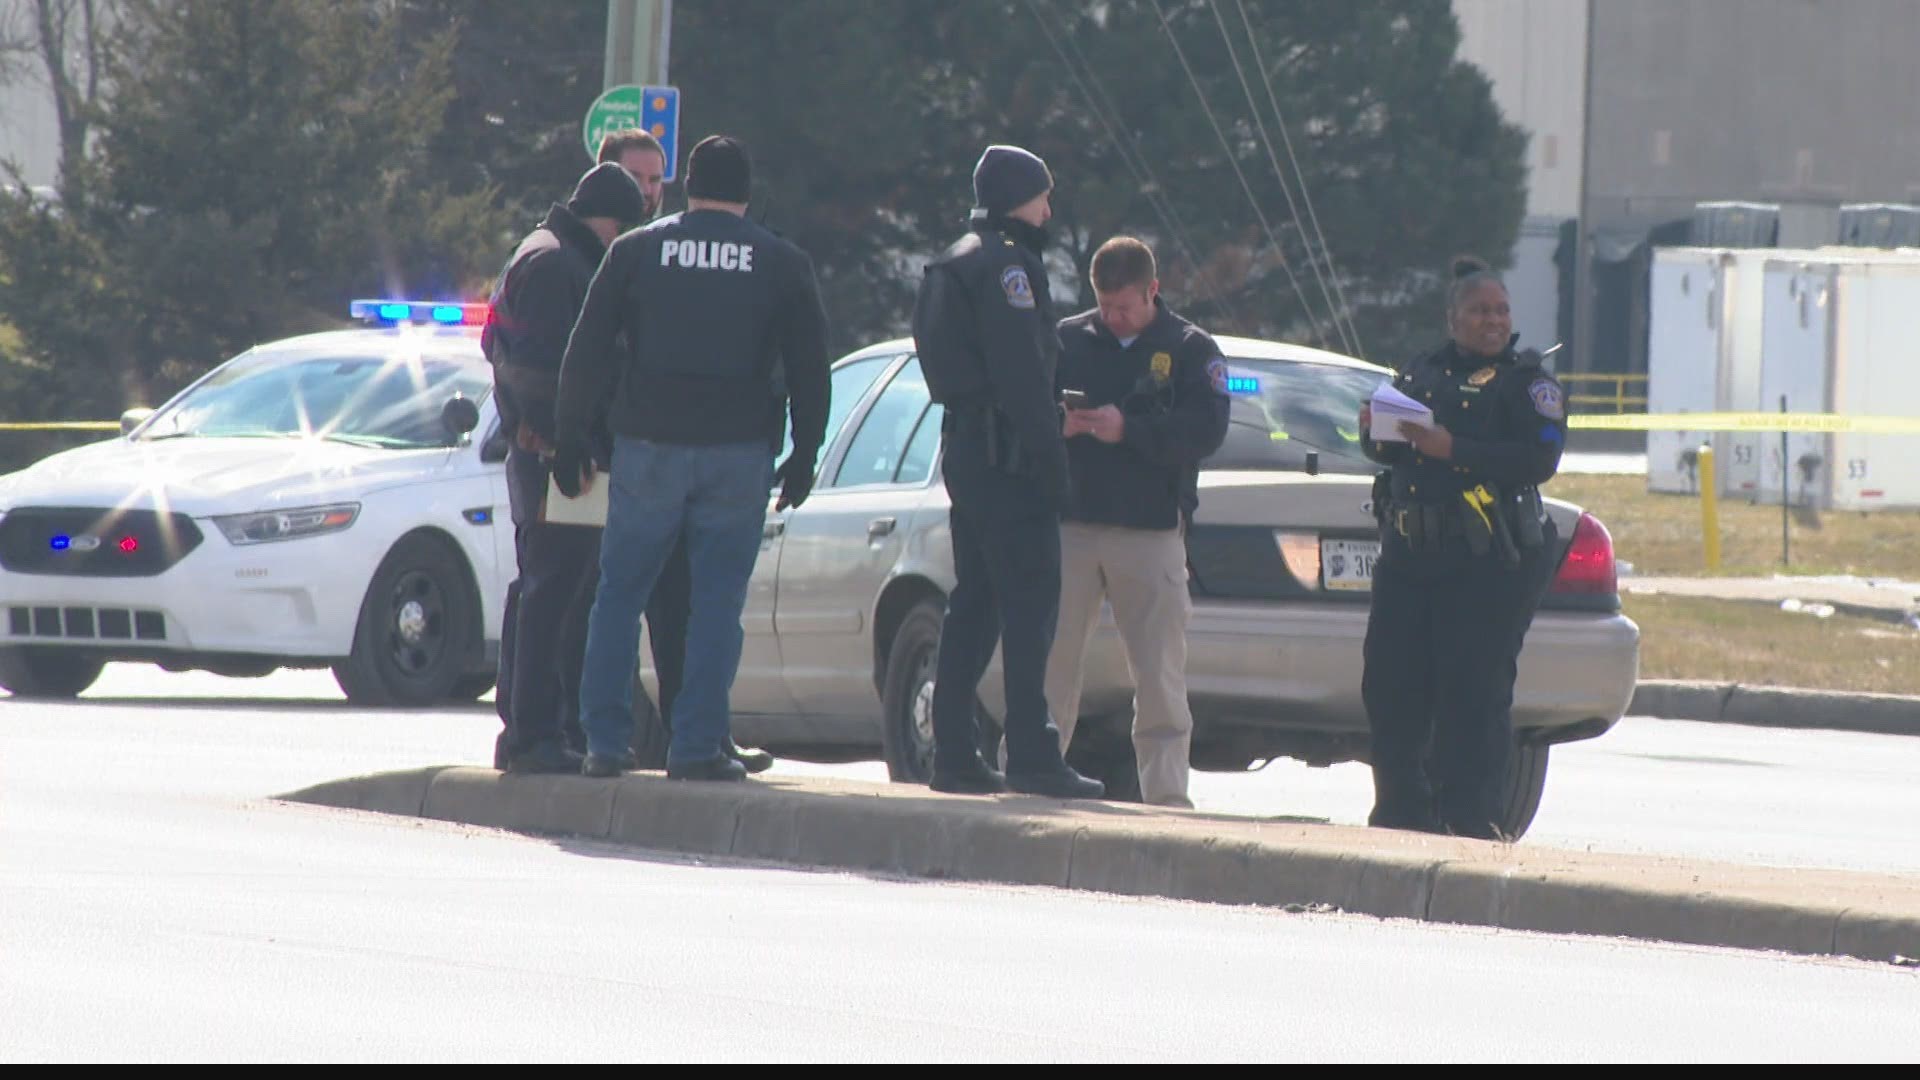 Two people were injured after what police described as a shoot out at a busy intersection.